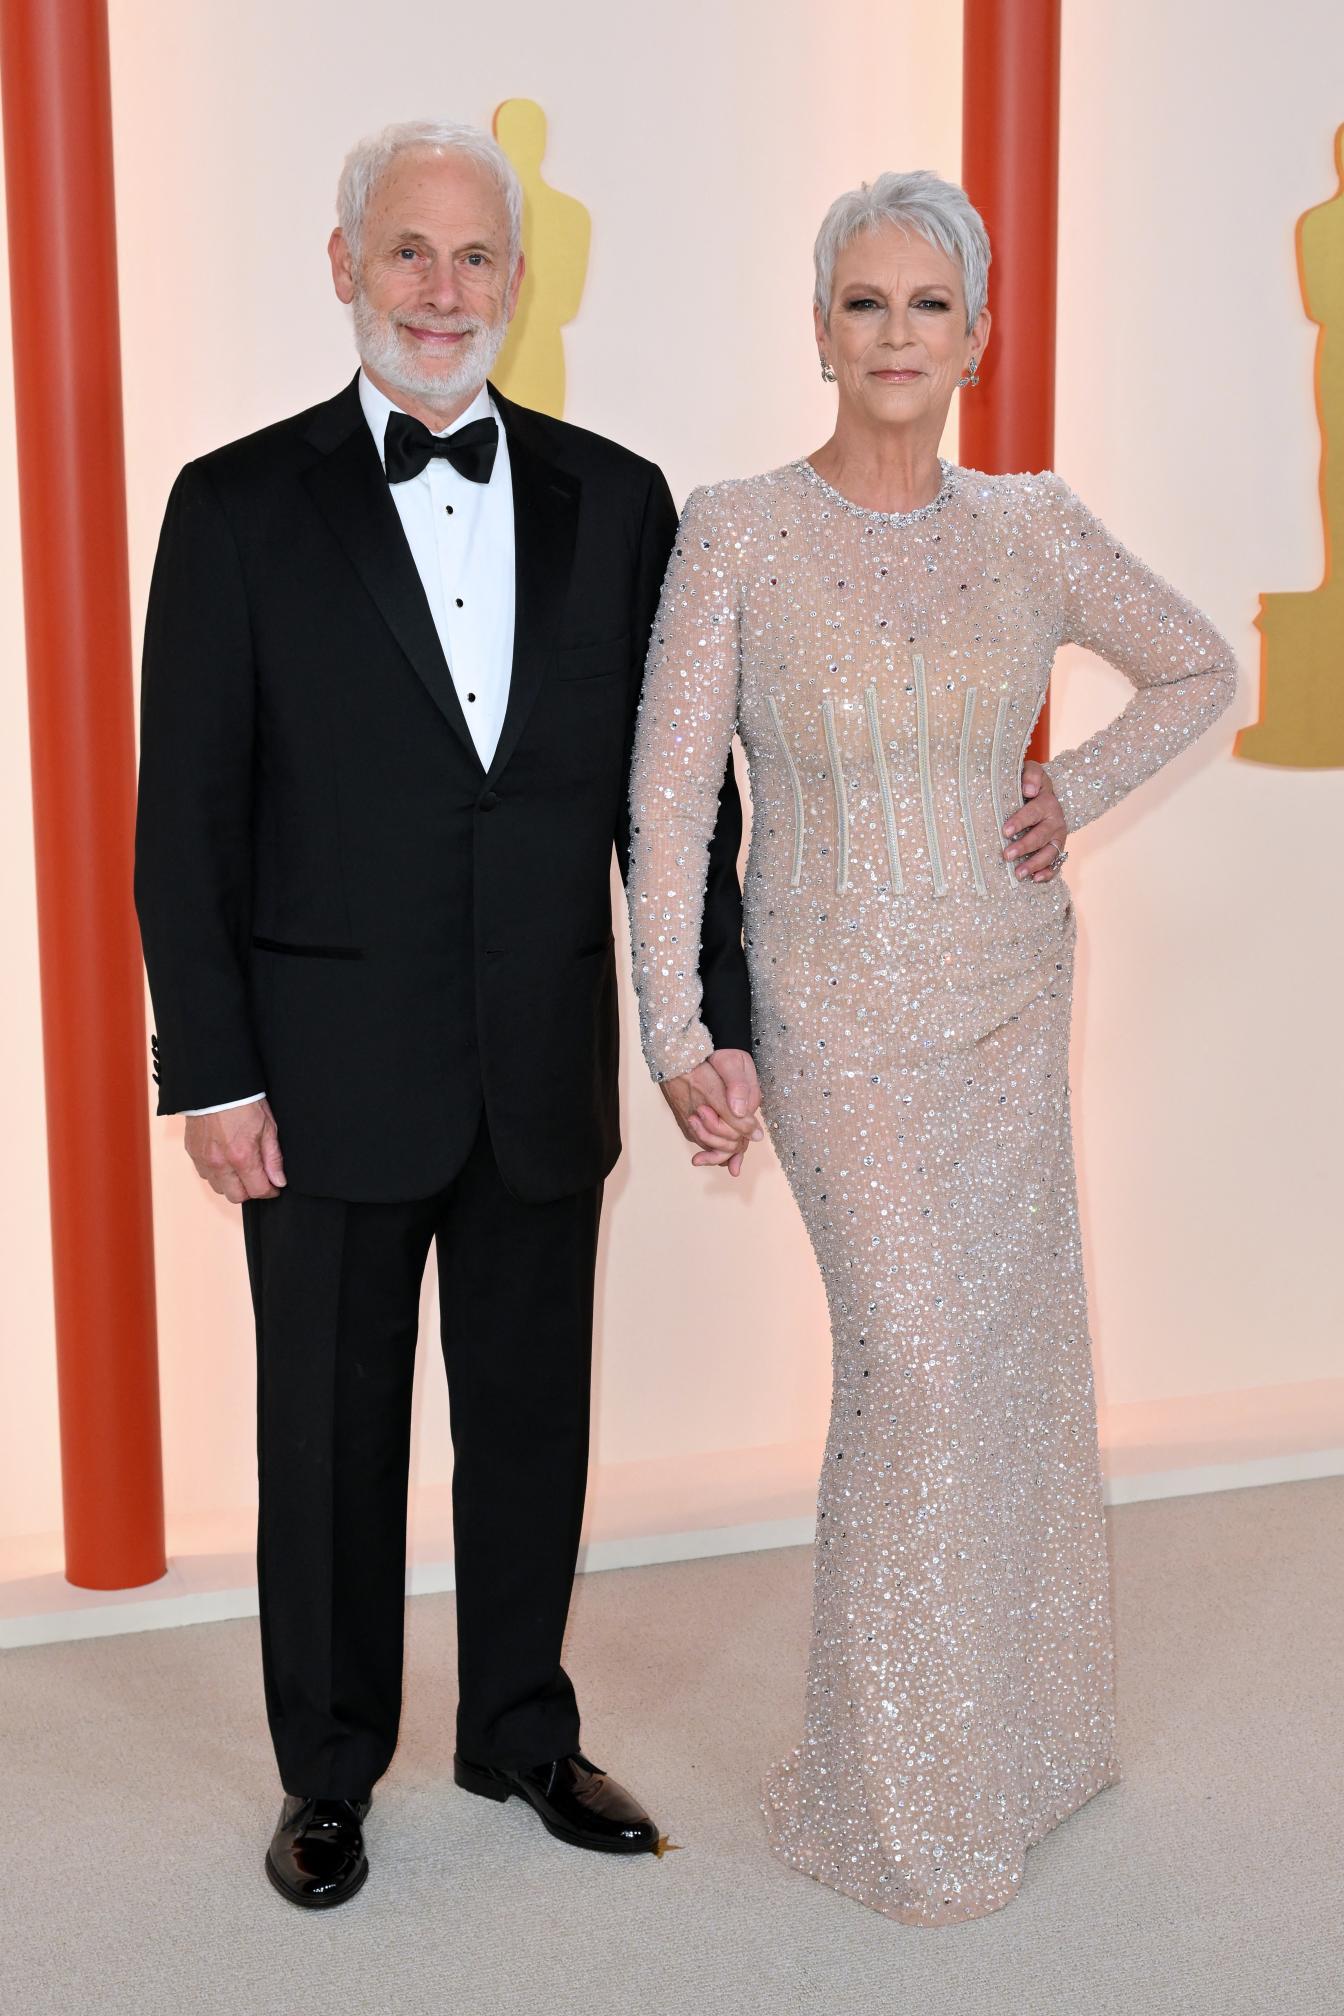 US actress Jamie Lee Curtis and husband Christopher Guest attend the 95th Annual Academy Awards at the Dolby Theatre in Hollywood